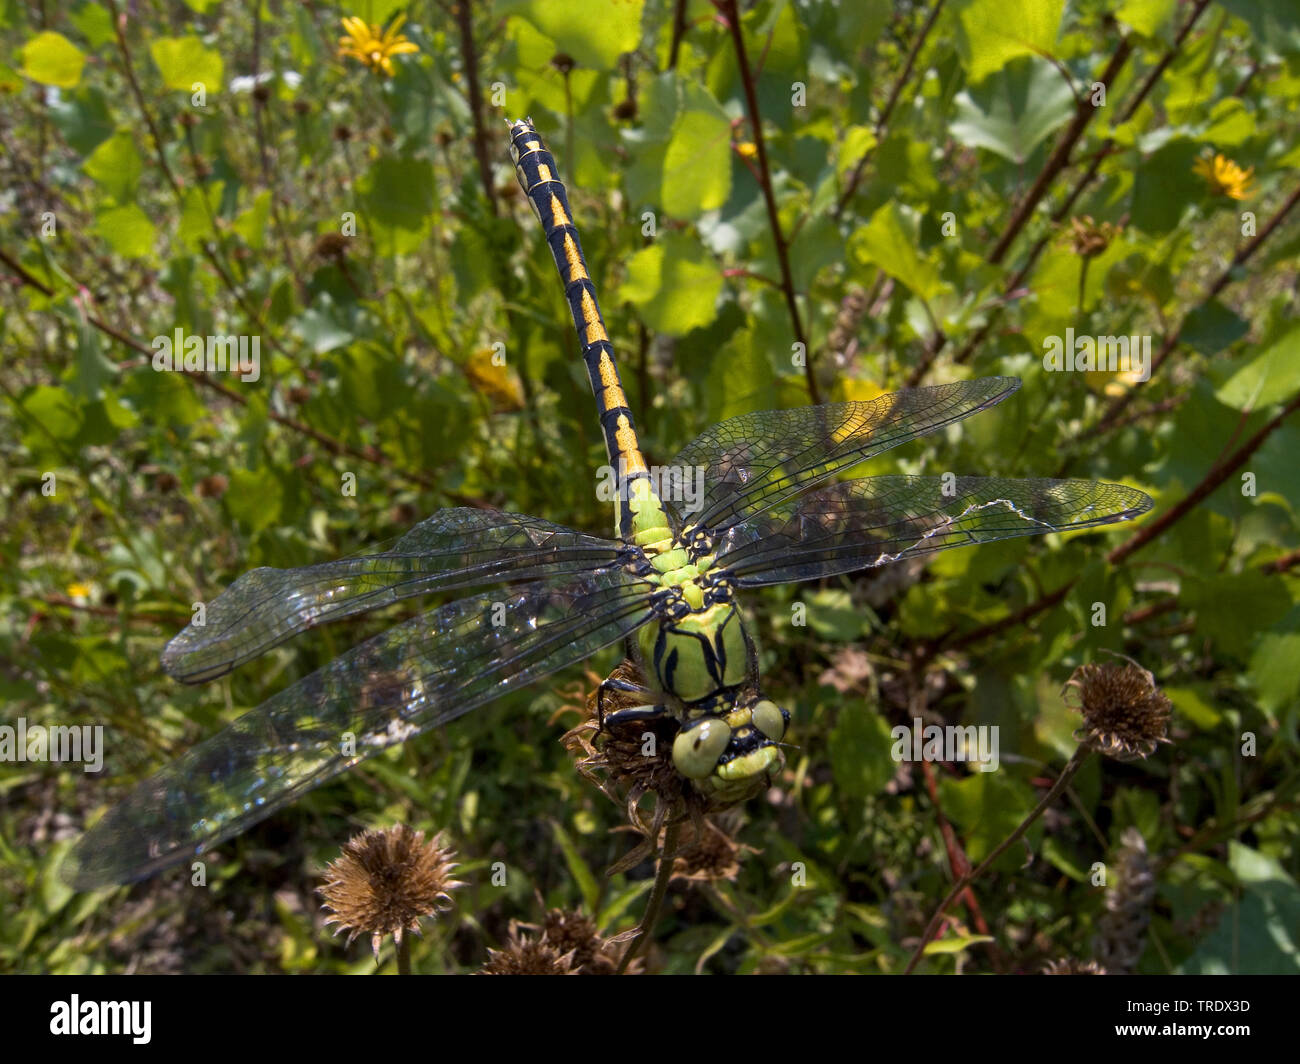 Serpentine dragonfly, Green Snaketail (Ophiogomphus serpentinus, Ophiogomphus cecilia), top view, Germany Stock Photo